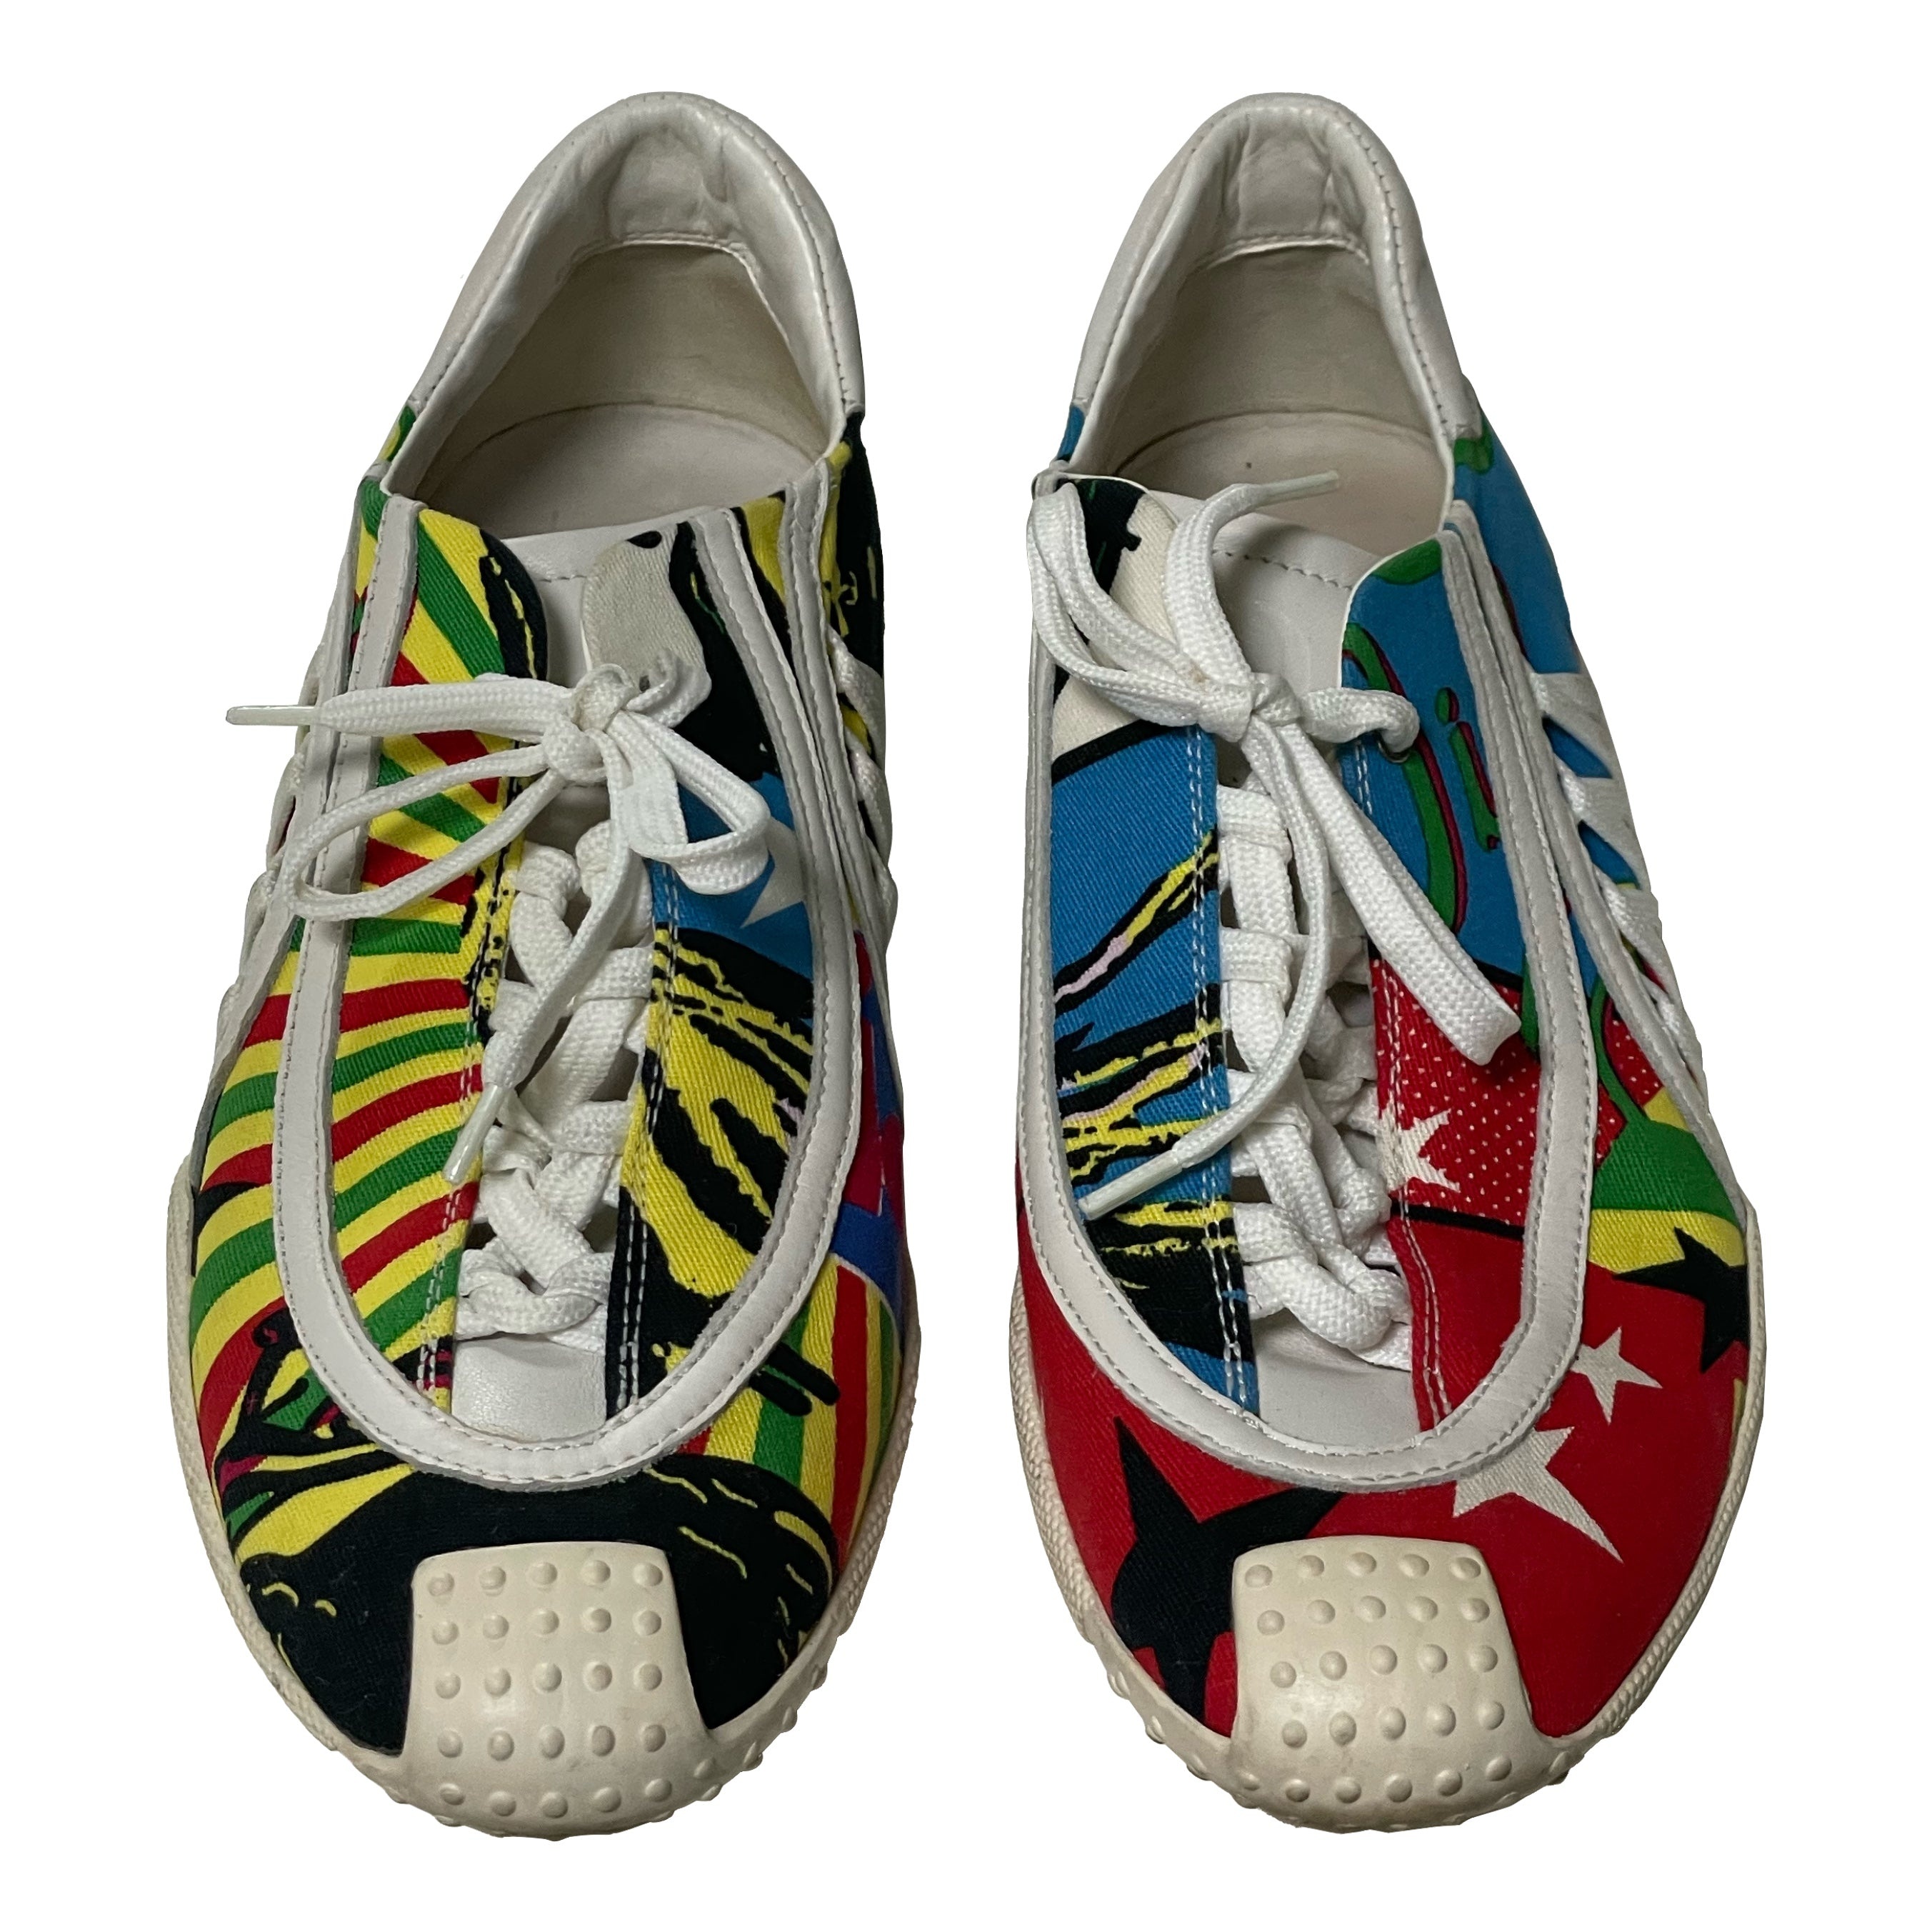 CHRISTIAN DIOR Fall Winter 2003 Rasta Mania Laced Up Sneakers - 2